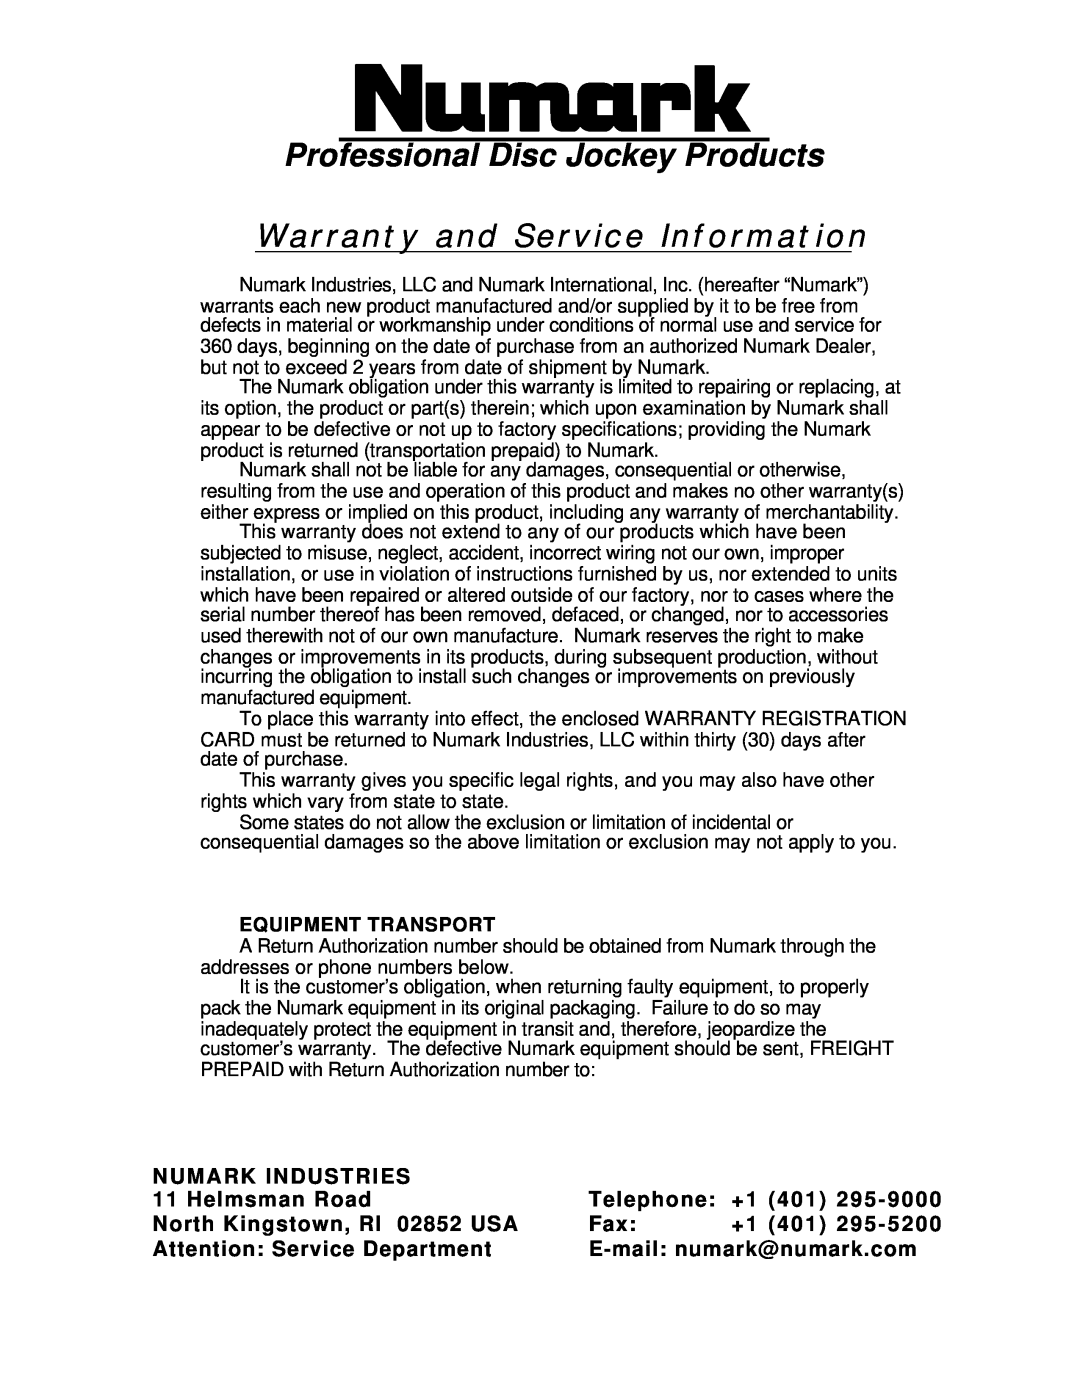 Numark Industries DM1635 owner manual Warranty and Service Information, Professional Disc Jockey Products 